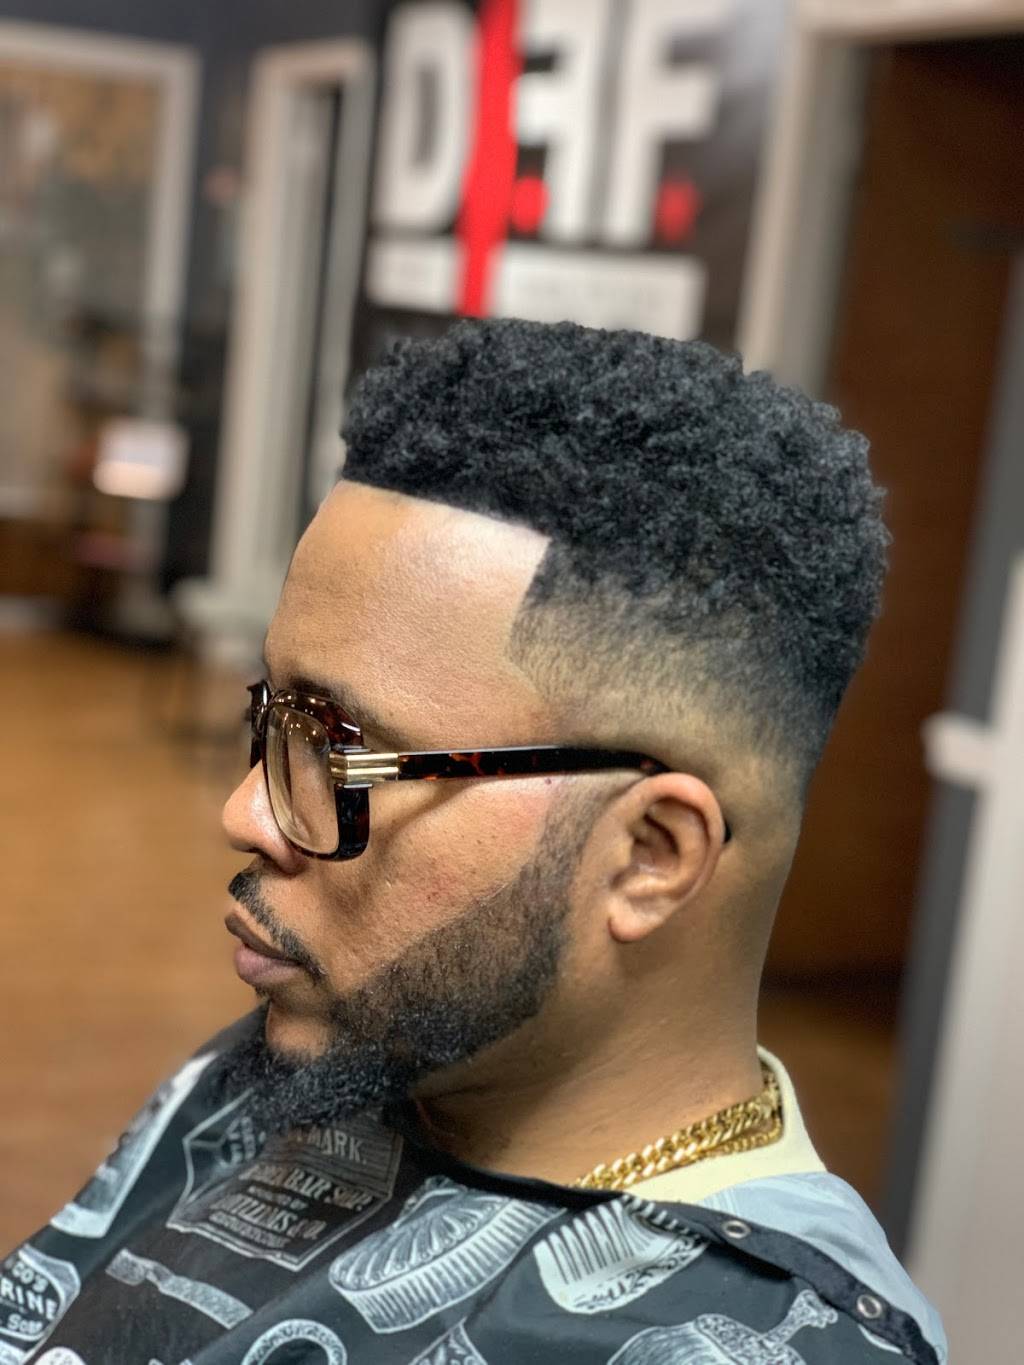 D1FF Hair Studio - hair care  | Photo 5 of 5 | Address: 717 Martin Luther King Dr W suite 100 b, Cincinnati, OH 45220, USA | Phone: (513) 657-8013